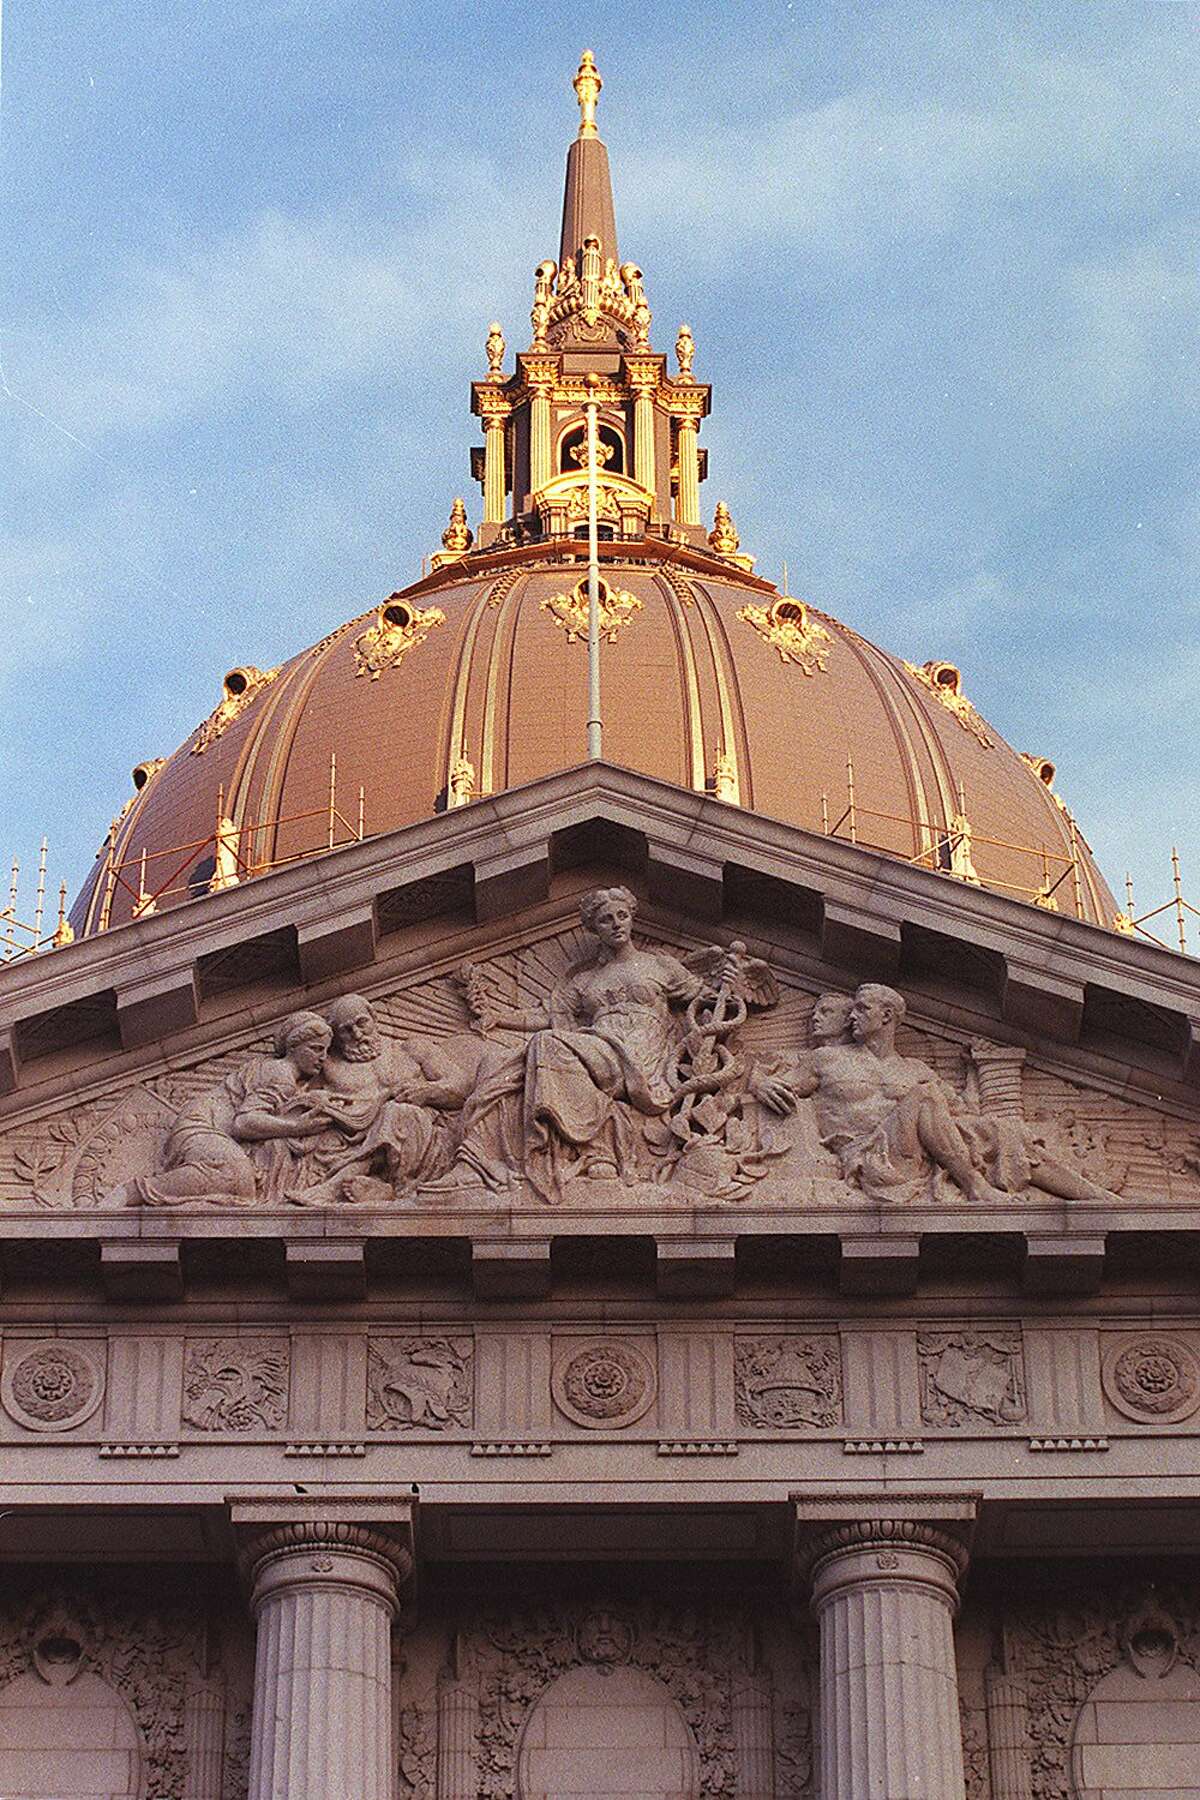 CITY HALL5/C/08DEC98/MN/DF - San Francisco City Hall has recently been renovated and the dome painted with gold leaf. CHRONICLE PHOTO BY DEANNE FITZMAURICE ALSO RAN: 01/22/1999, 01/04/04 Ran on: 11-25-2009 Photo caption Dummy text goes here. Dummy text goes here. Dummy text goes here. Dummy text goes here. Dummy text goes here. Dummy text goes here. Dummy text goes here. Dummy text goes here.###Photo: adachi25_PH913161600CHRONICLE###Live Caption:###Caption History:CITY HALL5-C-08DEC98-MN-DF - San Francisco City Hall has recently been renovated and the dome painted with gold leaf. CHRONICLE PHOTO BY DEANNE FITZMAURICE ALSO RAN: 01-22-1999, 01-04-04###Notes:###Special Instructions:CAT